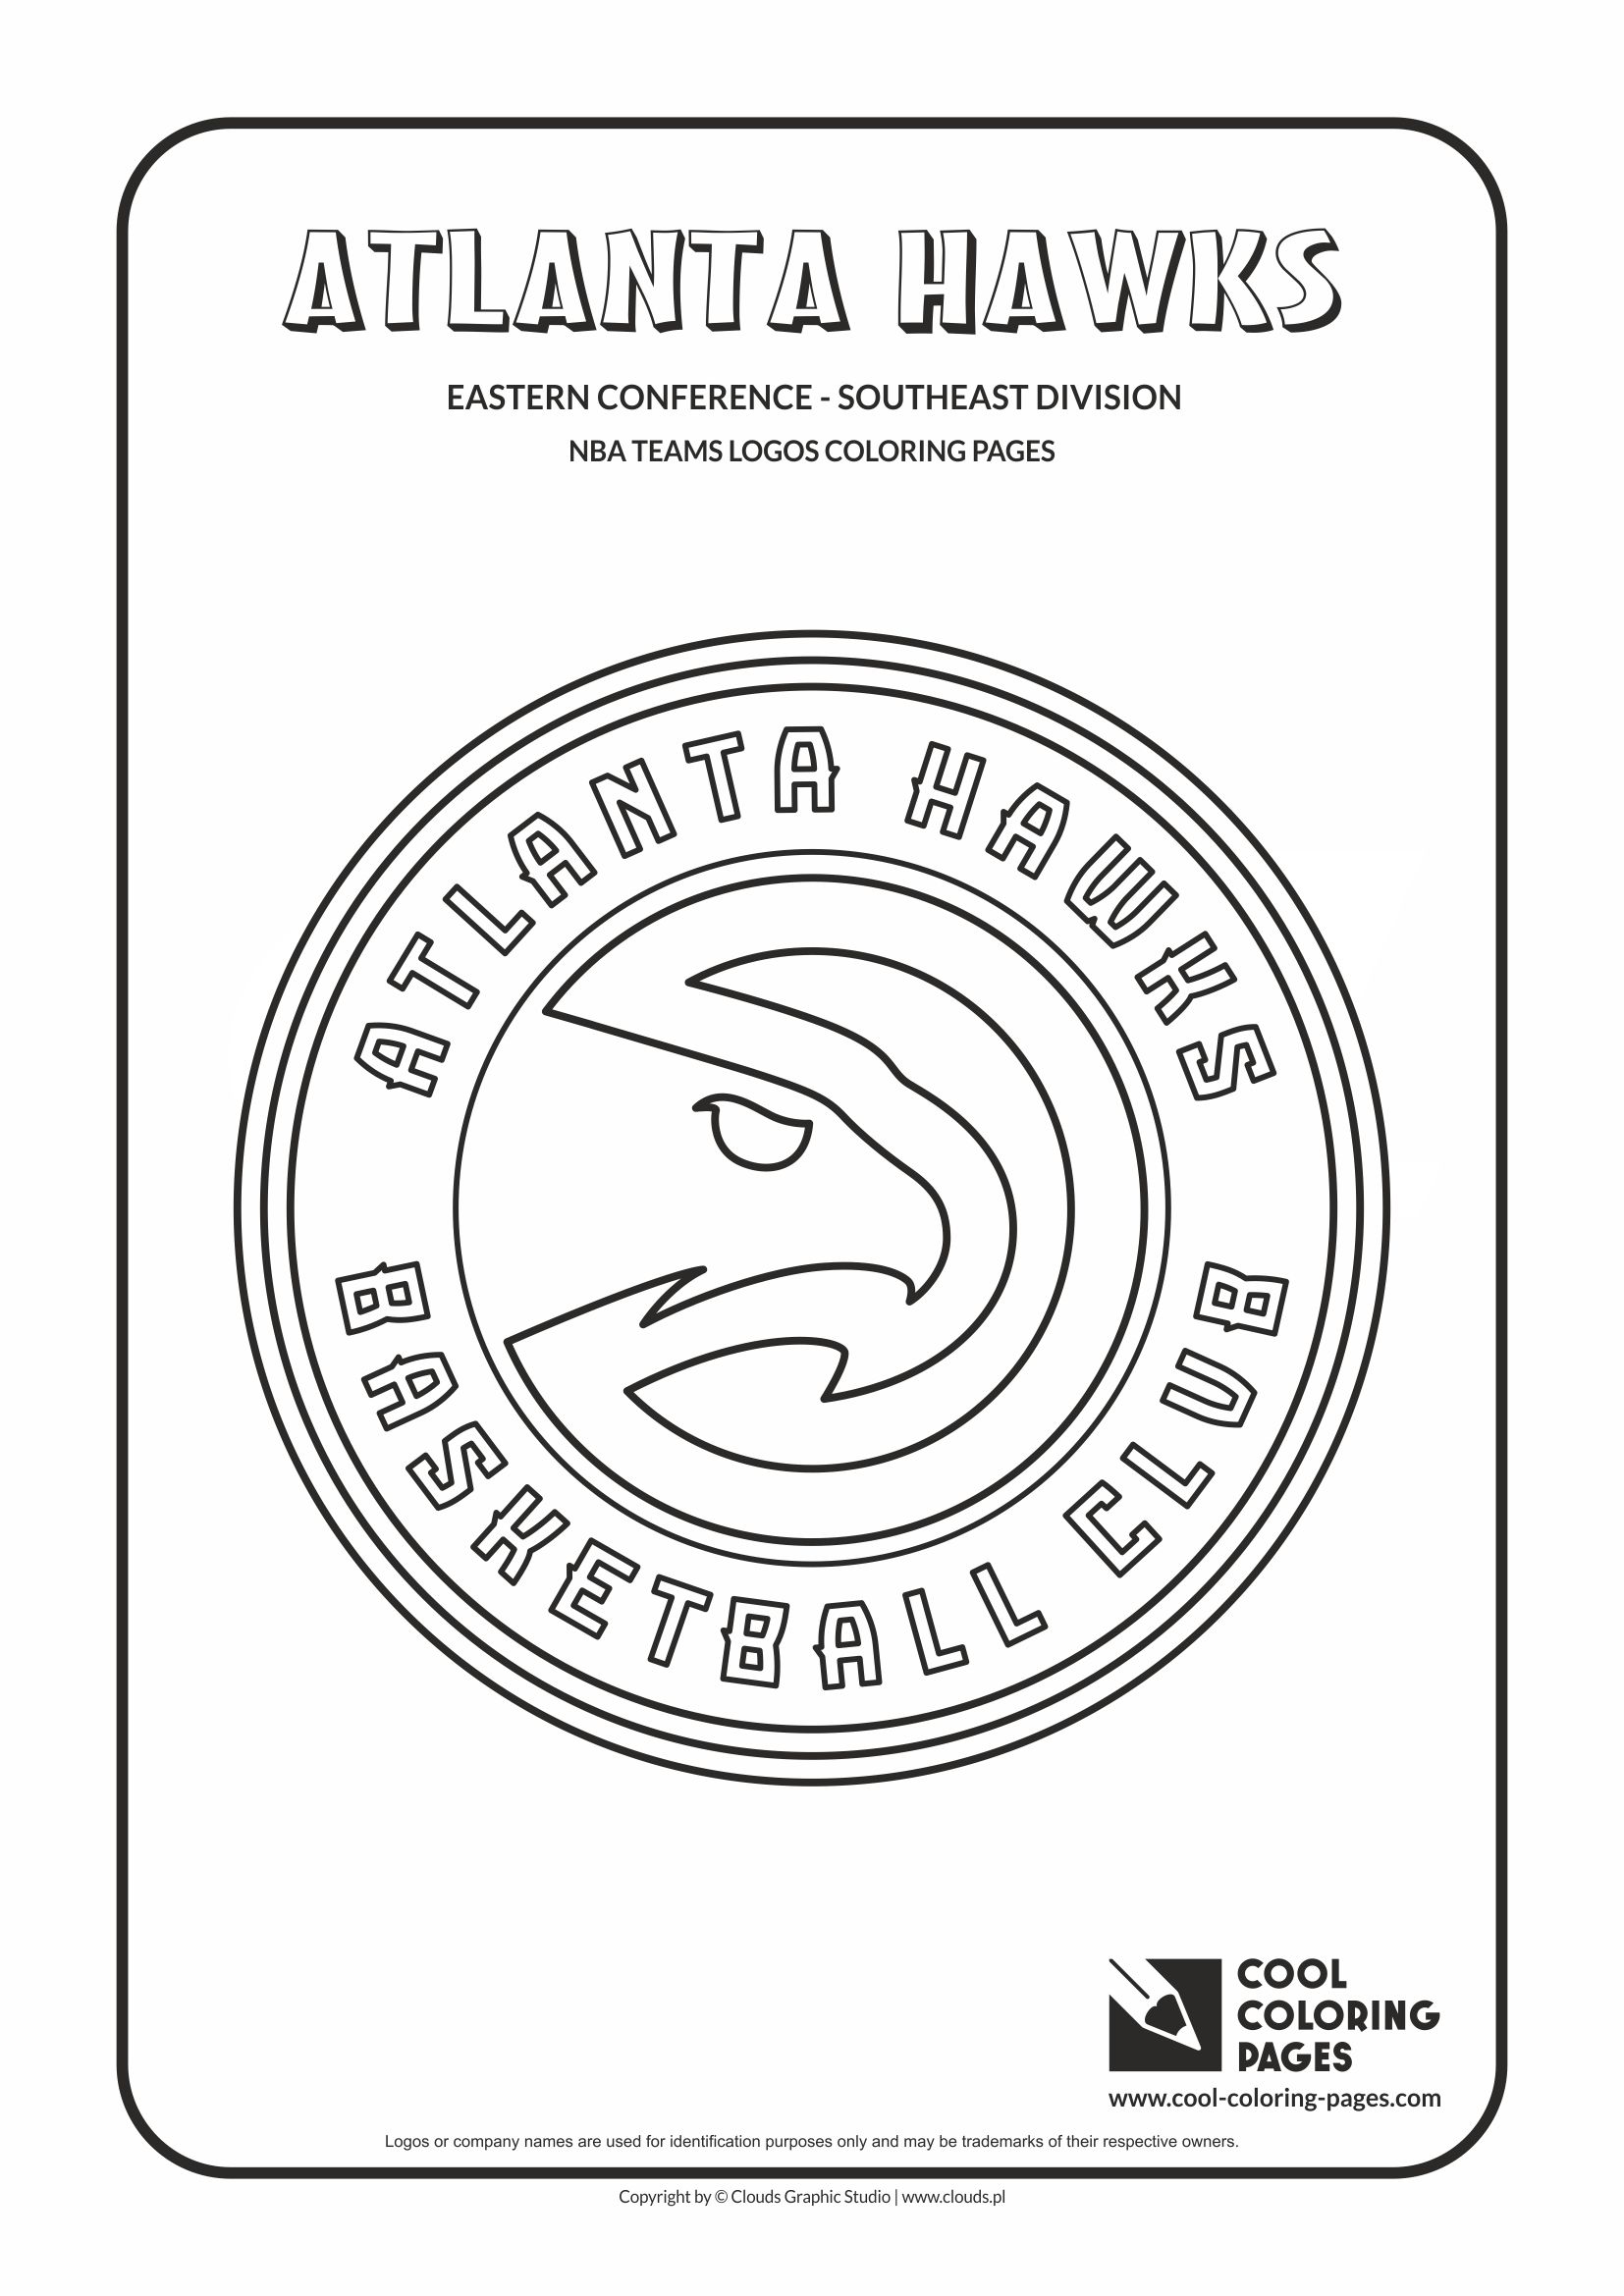 Cool Coloring Pages - NBA Basketball Clubs Logos - Easter Conference - Southeast Division / Atlanta Hawks logo / Coloring page with Atlanta Hawks logo